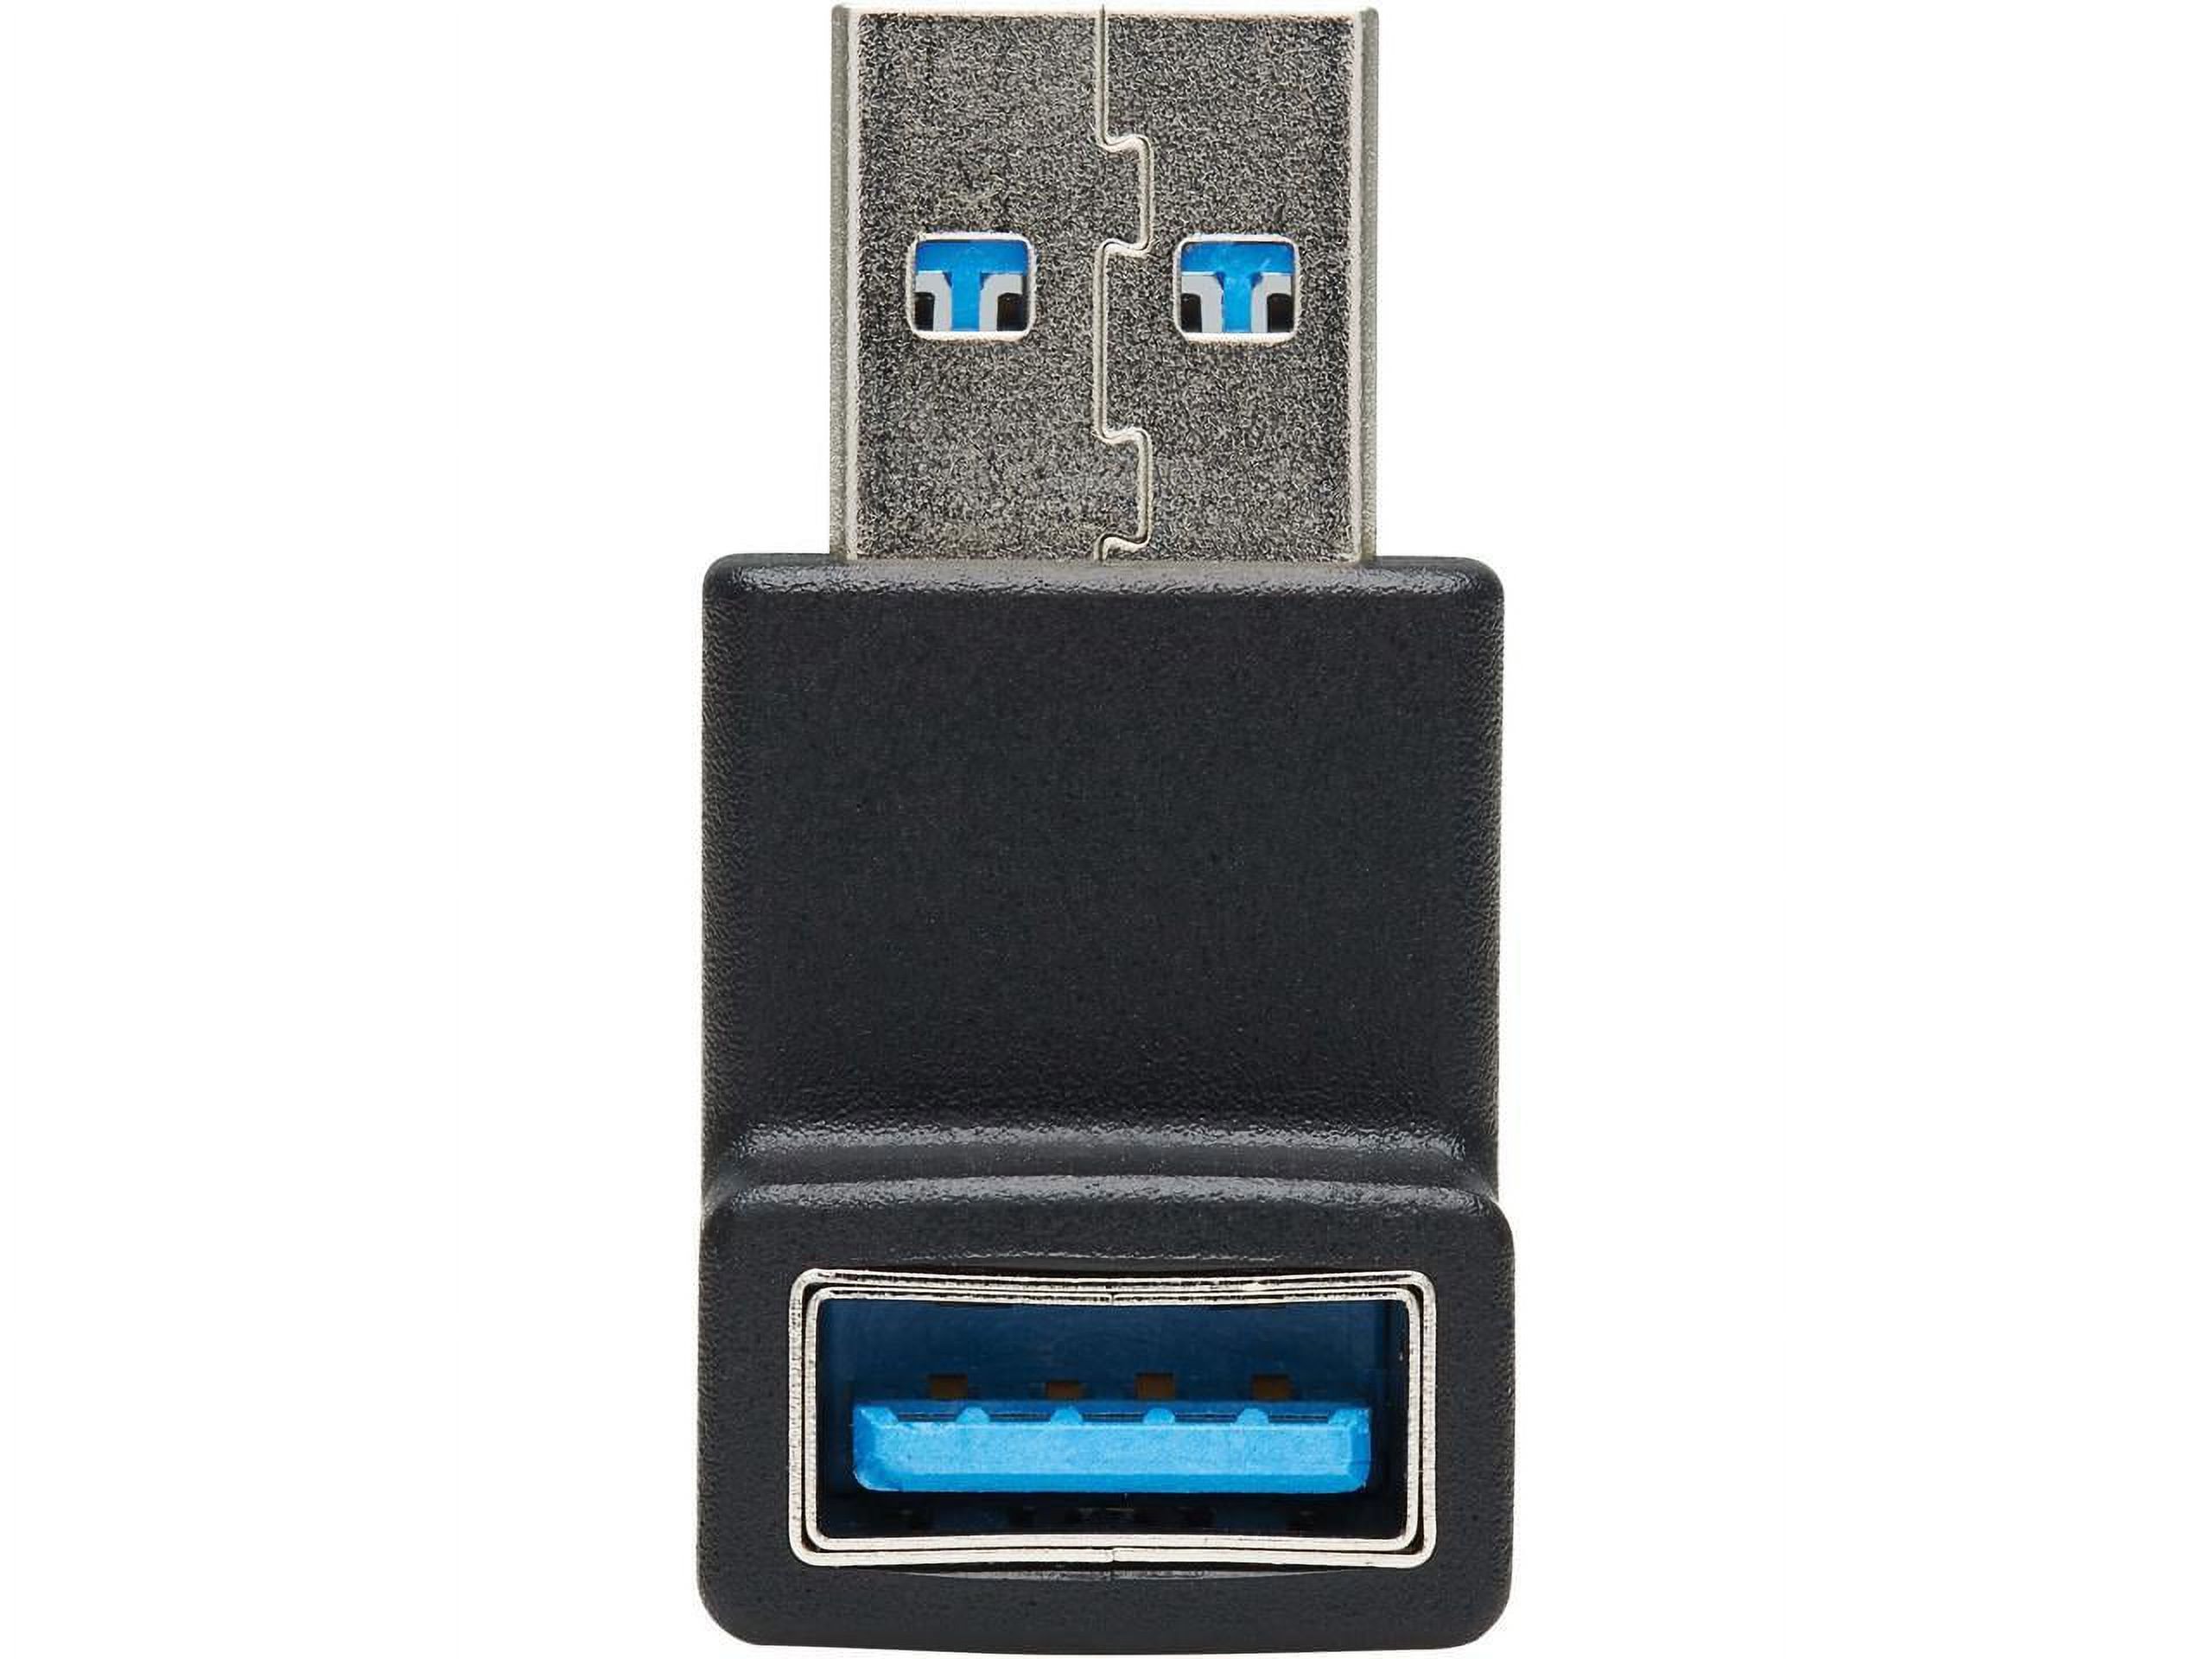 Tripp Lite USB 3.0 SuperSpeed Adapter - USB-A to USB-A, M/F, Down Angle, Black - image 3 of 11